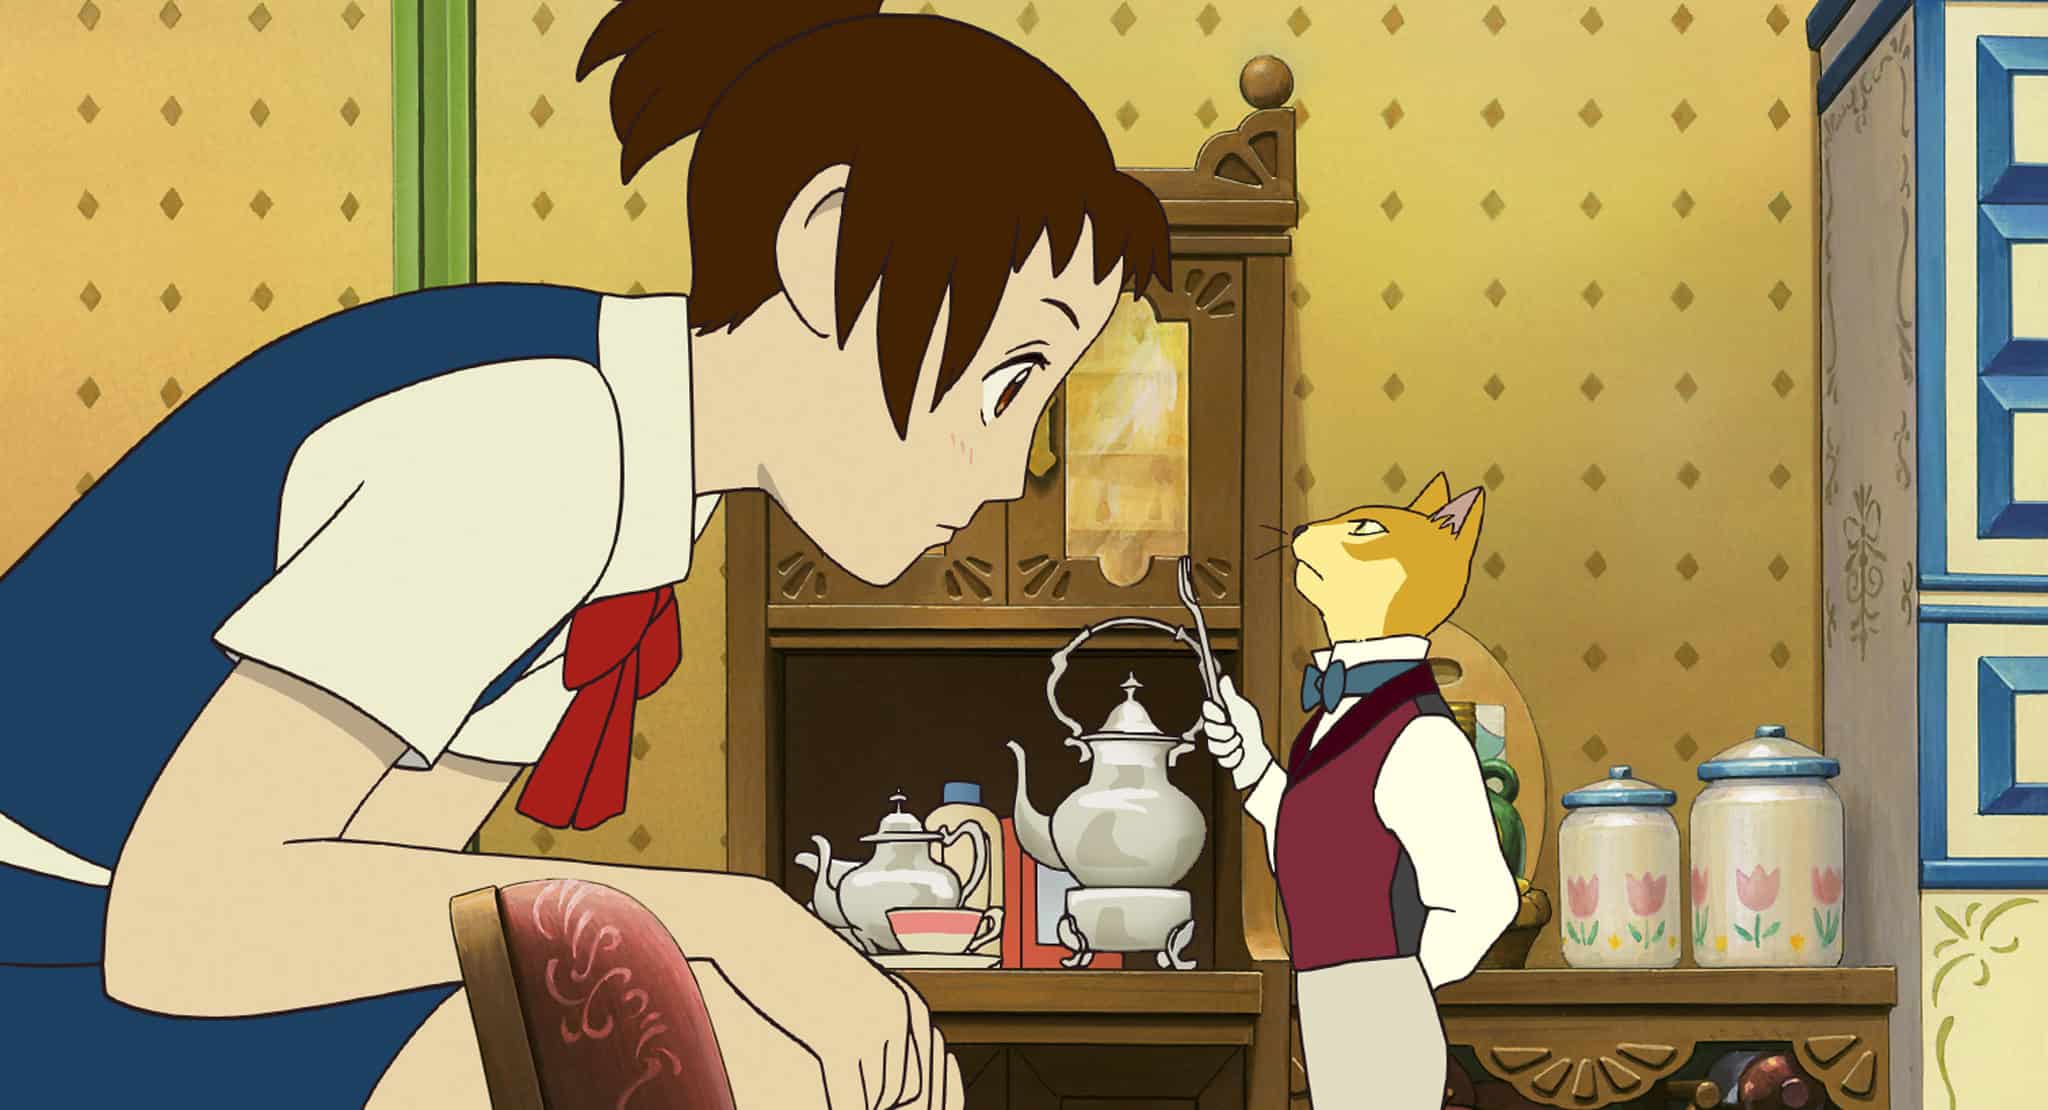 An animated schoolgirl talking to a cat in this image from Studio Ghibli.